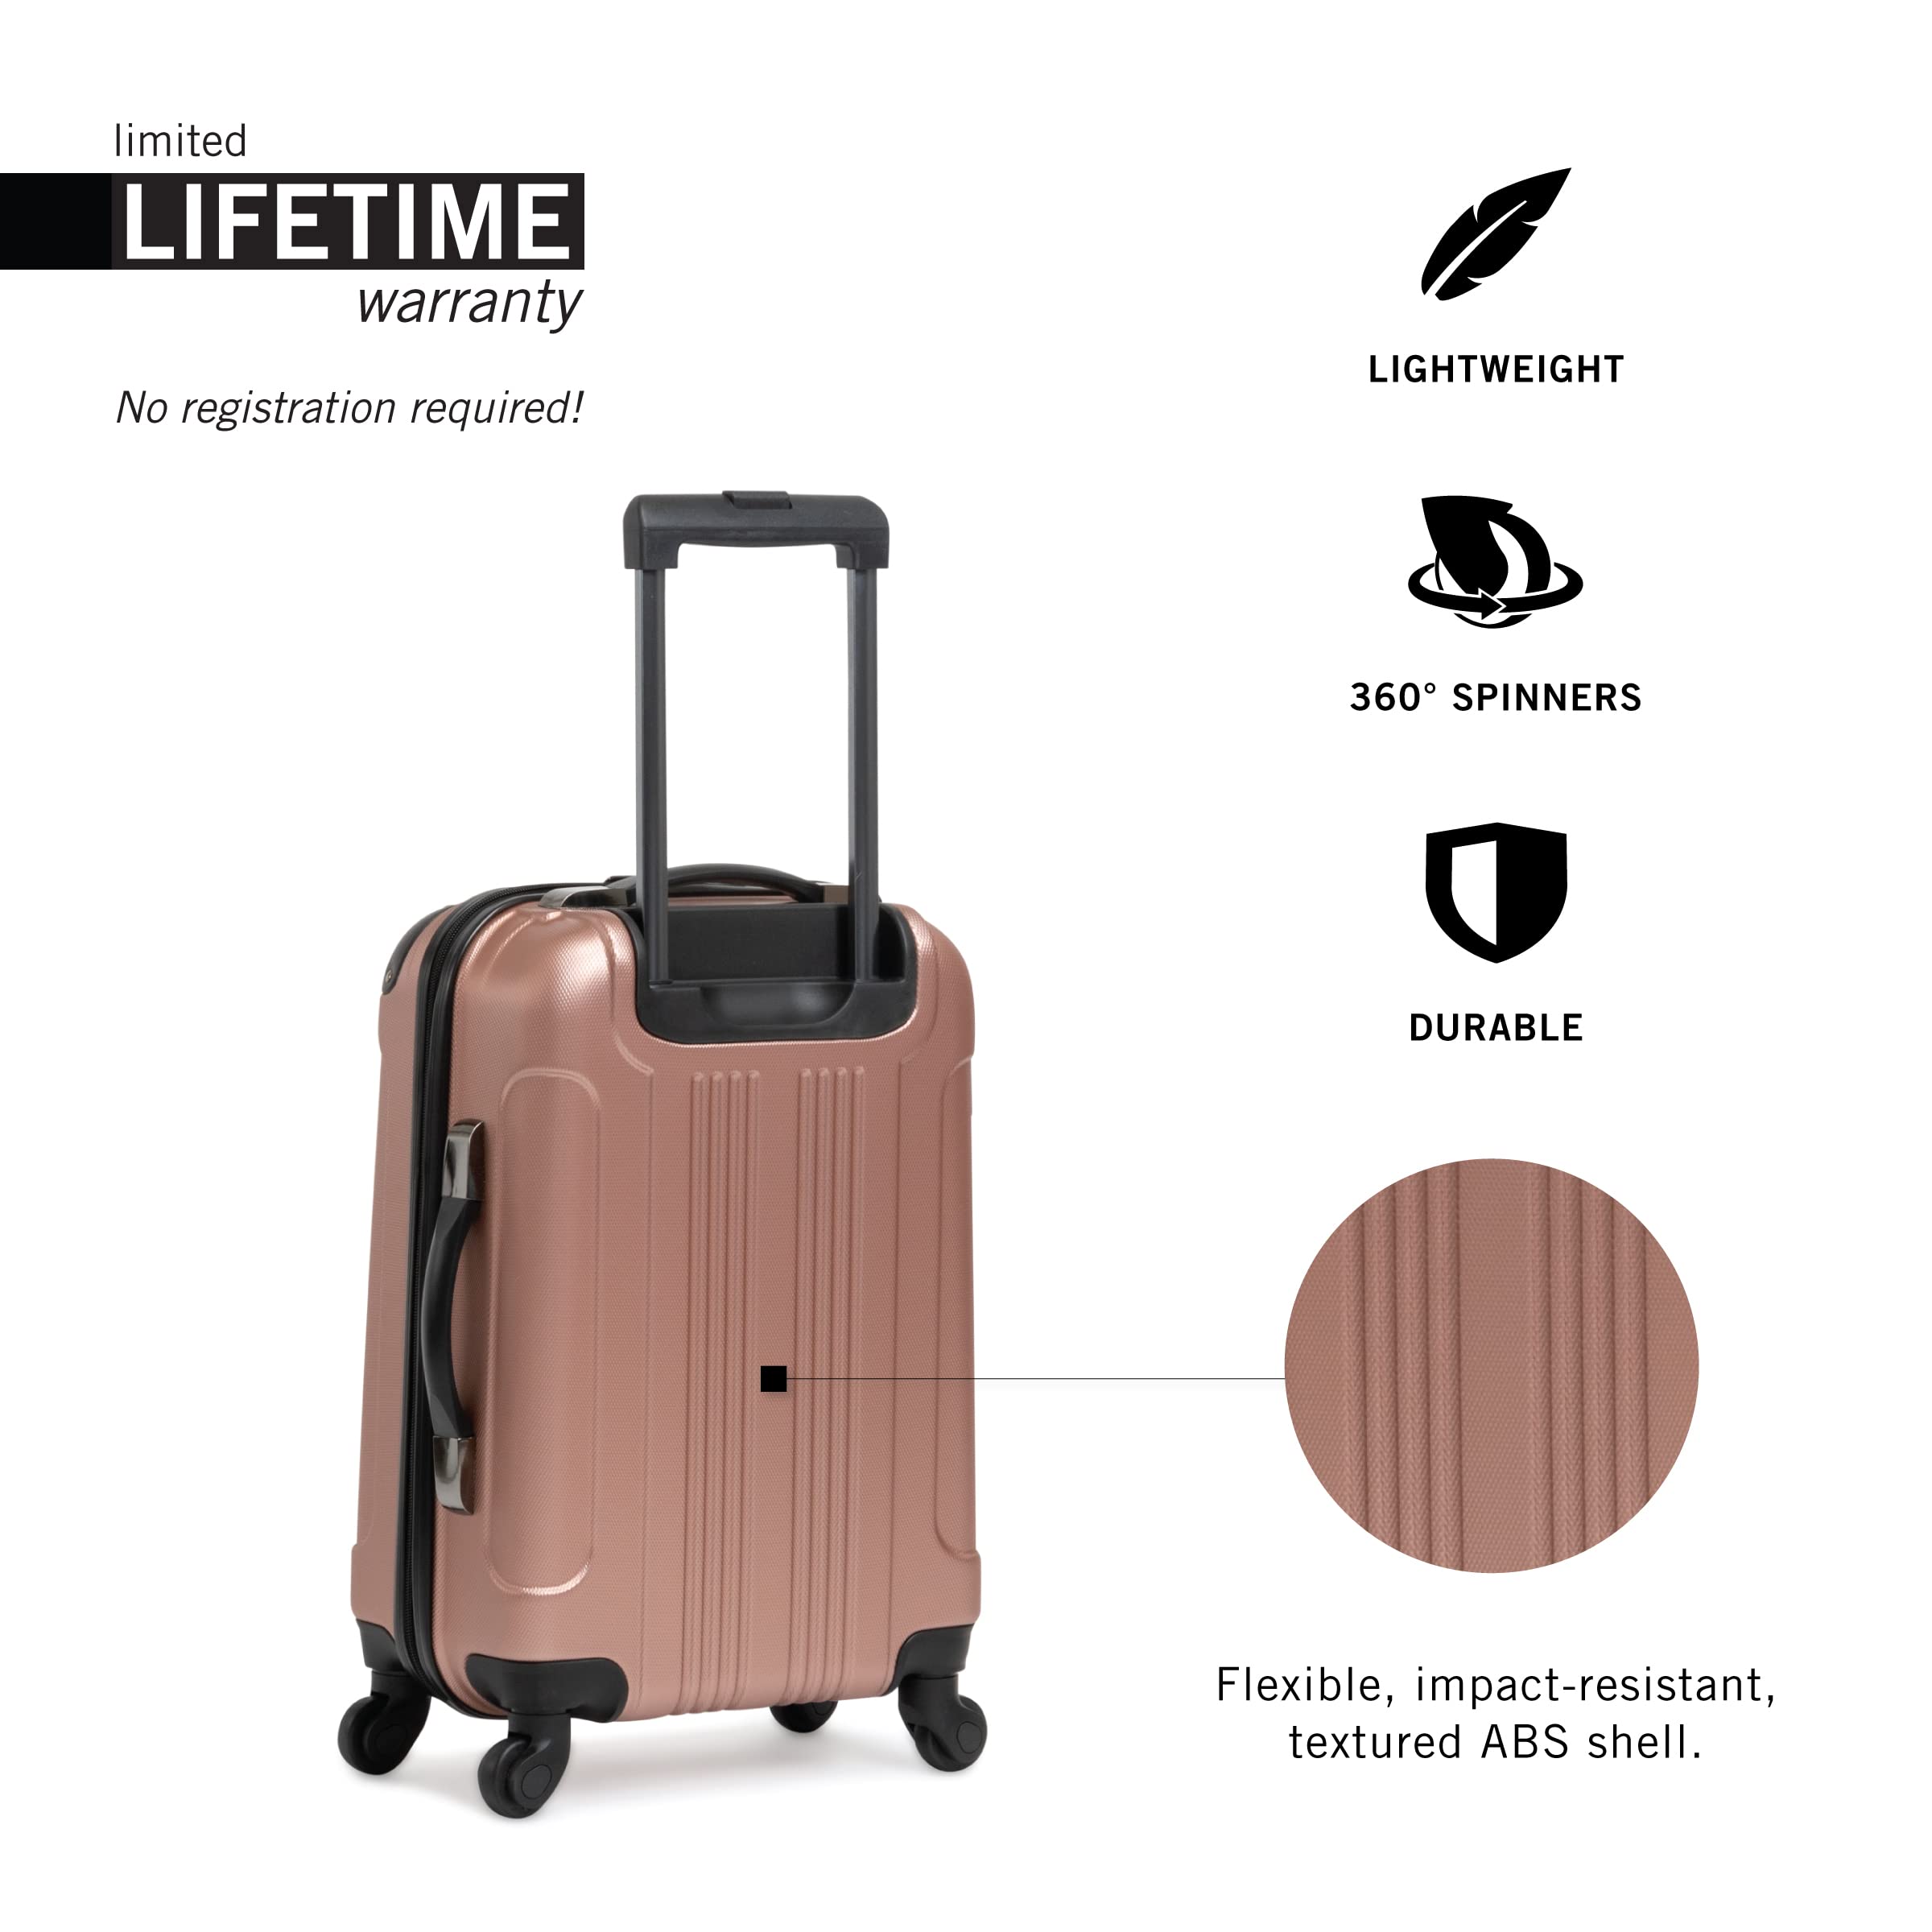 Kenneth Cole Reaction Out Of Bounds 28-Inch Check-Size Lightweight Durable Hardshell 4-Wheel Spinner Upright Luggage, Rose Gold